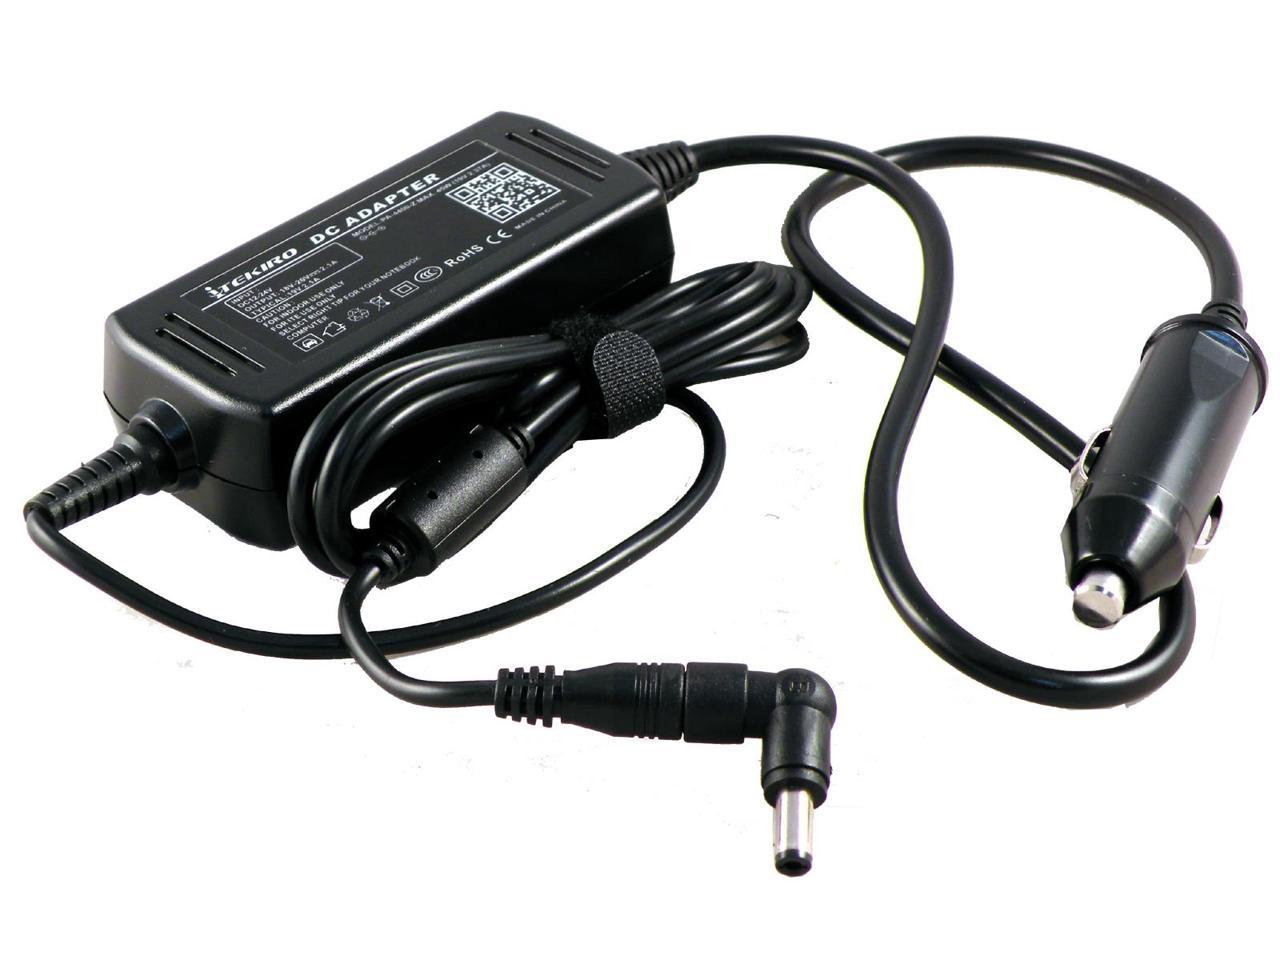 Genuine Asus Laptop Charger AC Adapter Power Supply AD890326 010ALF 19V 33W 5.5* 